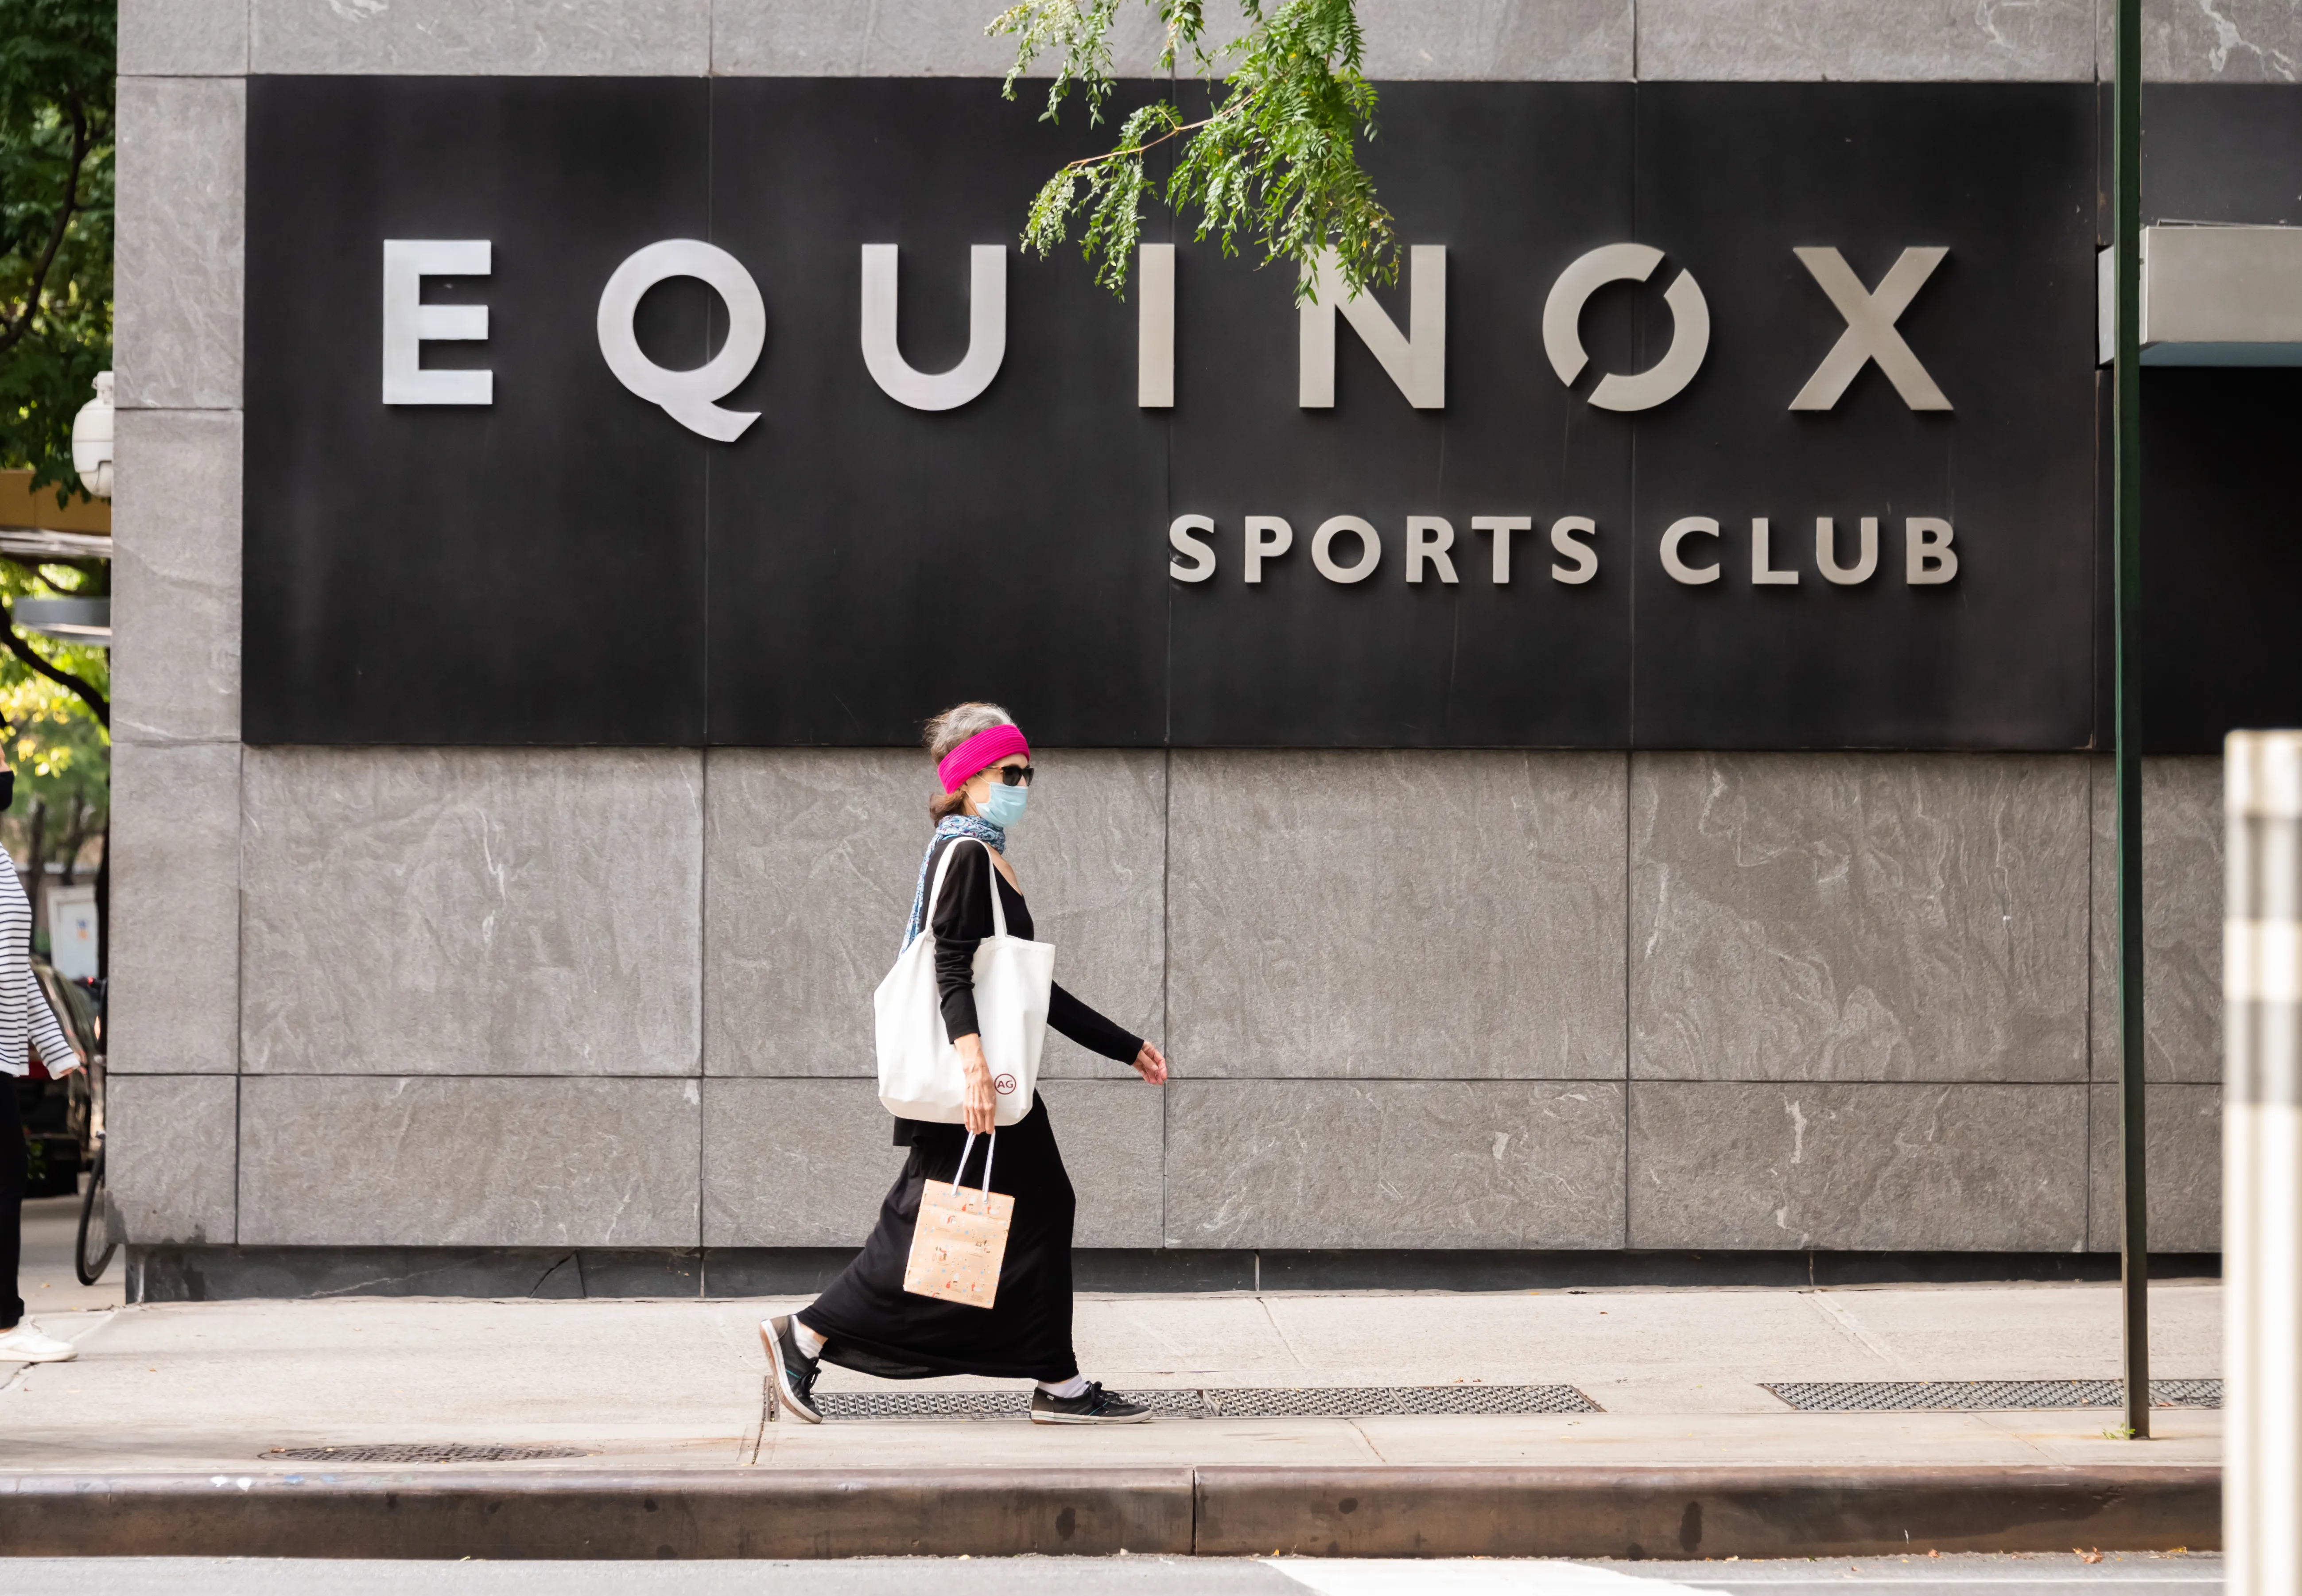 Equinox Beach Data Breach Exposes Personal Information of Millions